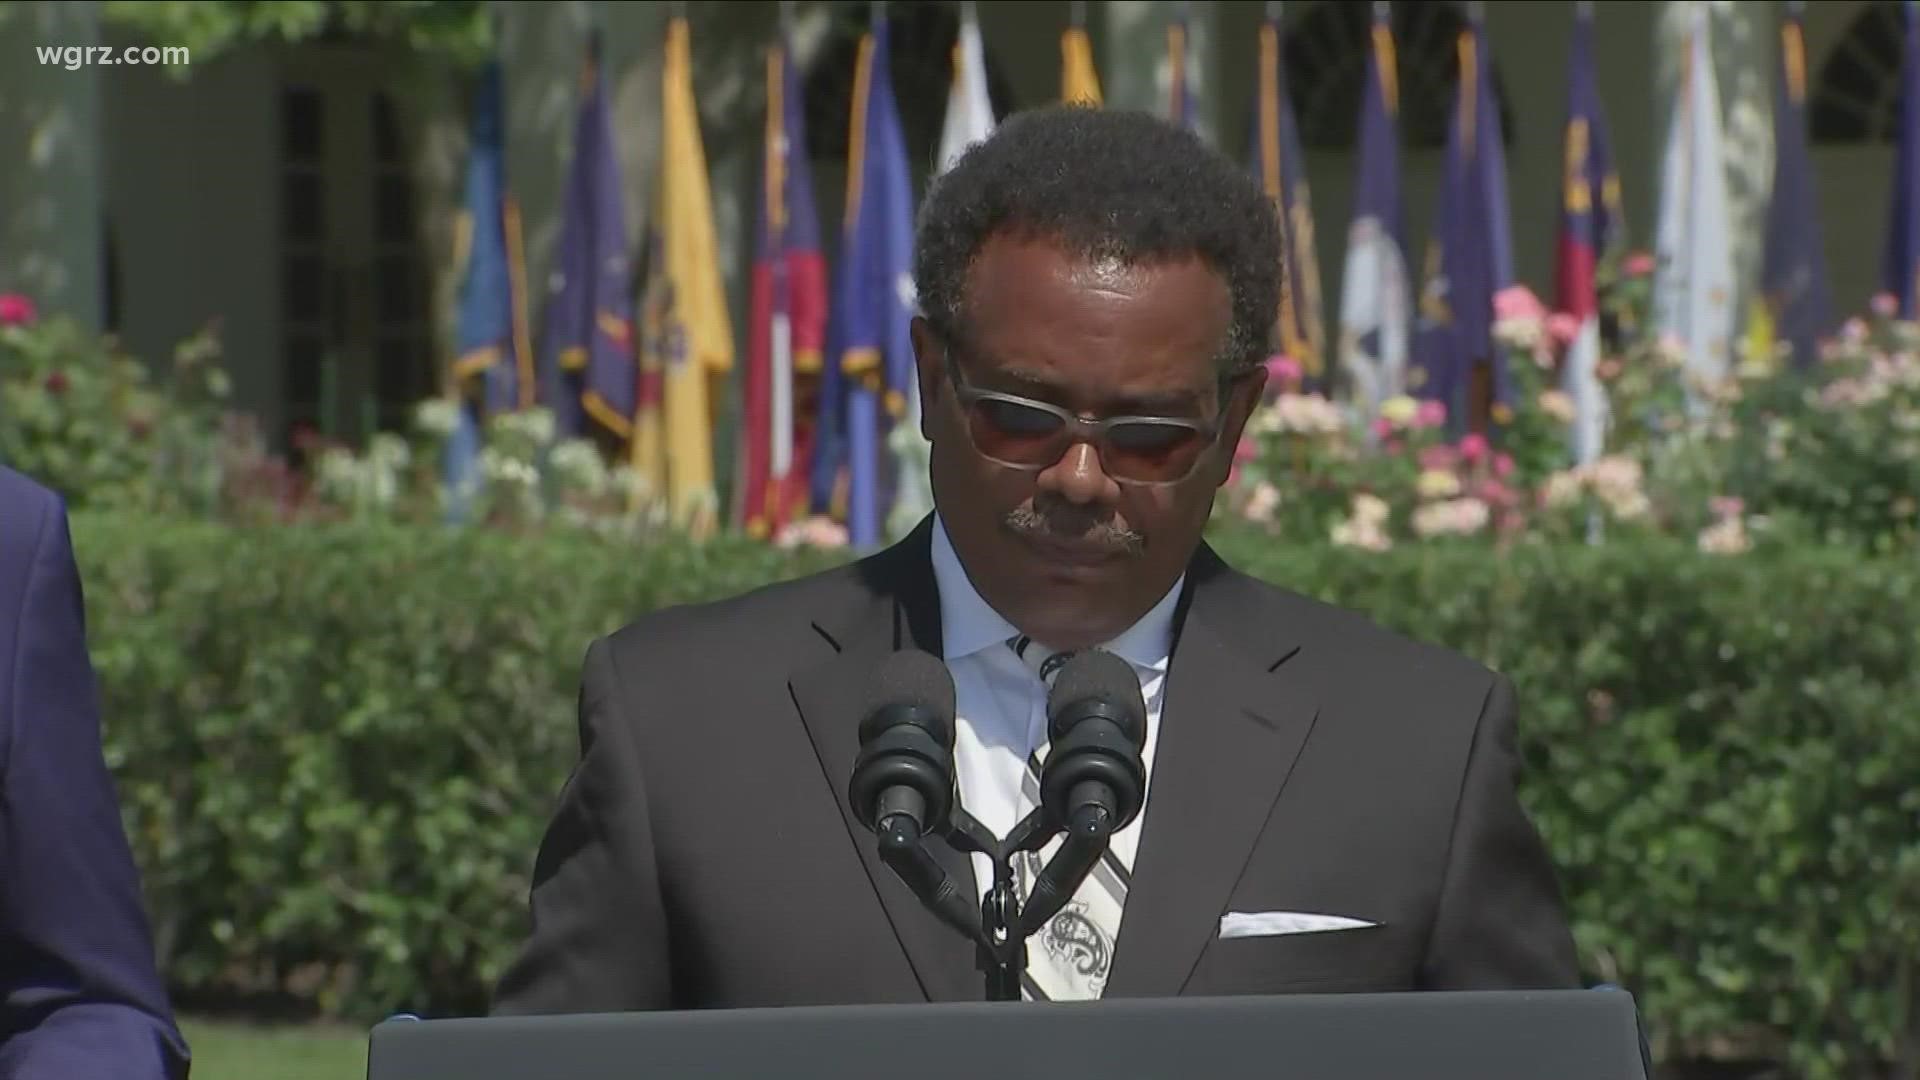 Former Buffalo fire commissioner Garnell Whitfield, whose mother was one of the ten victims of the Tops shootings spoke at the White House.